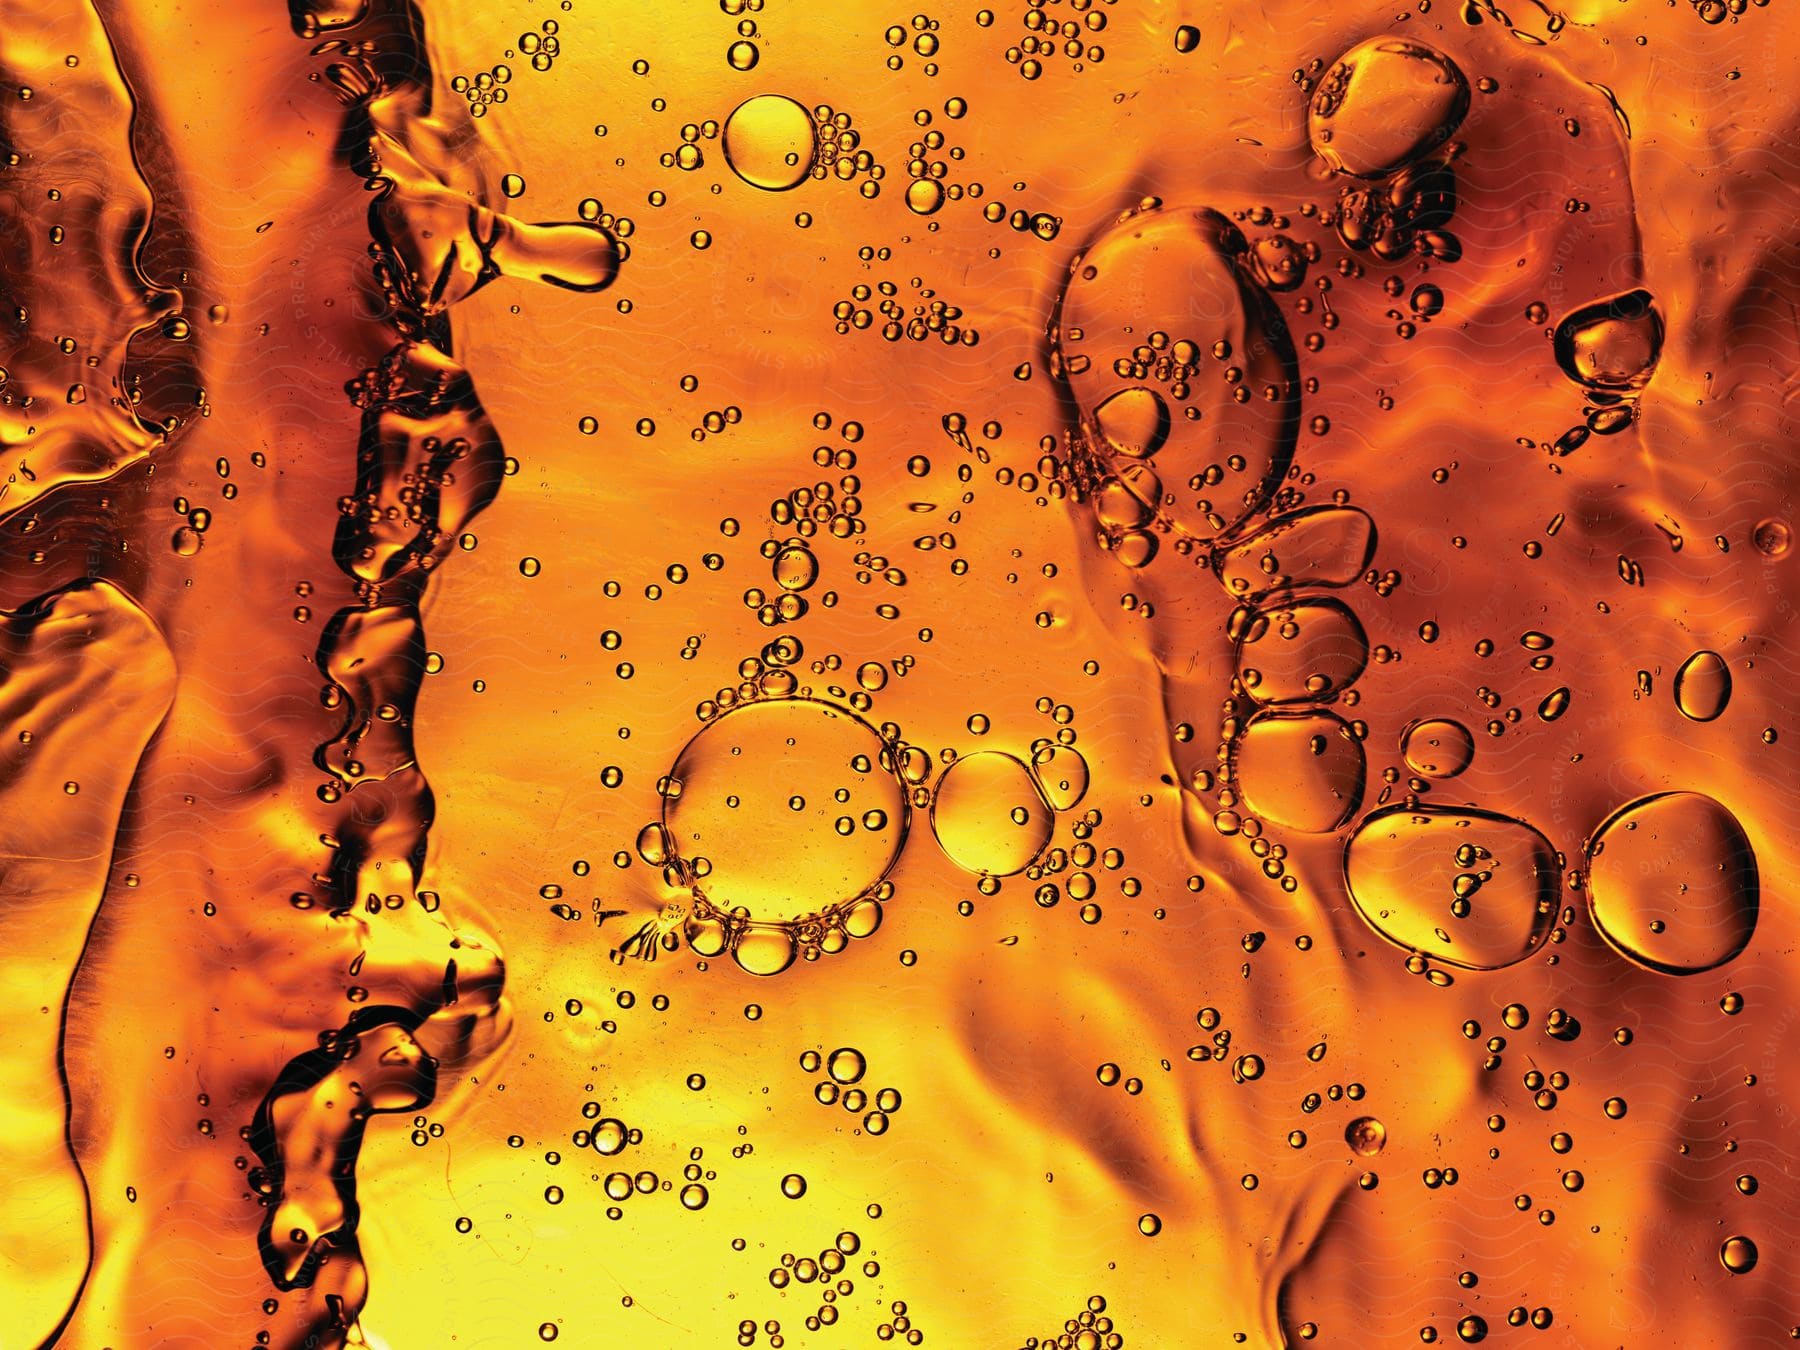 Bubble formations in various shapes and sizes suspended in an amber liquid